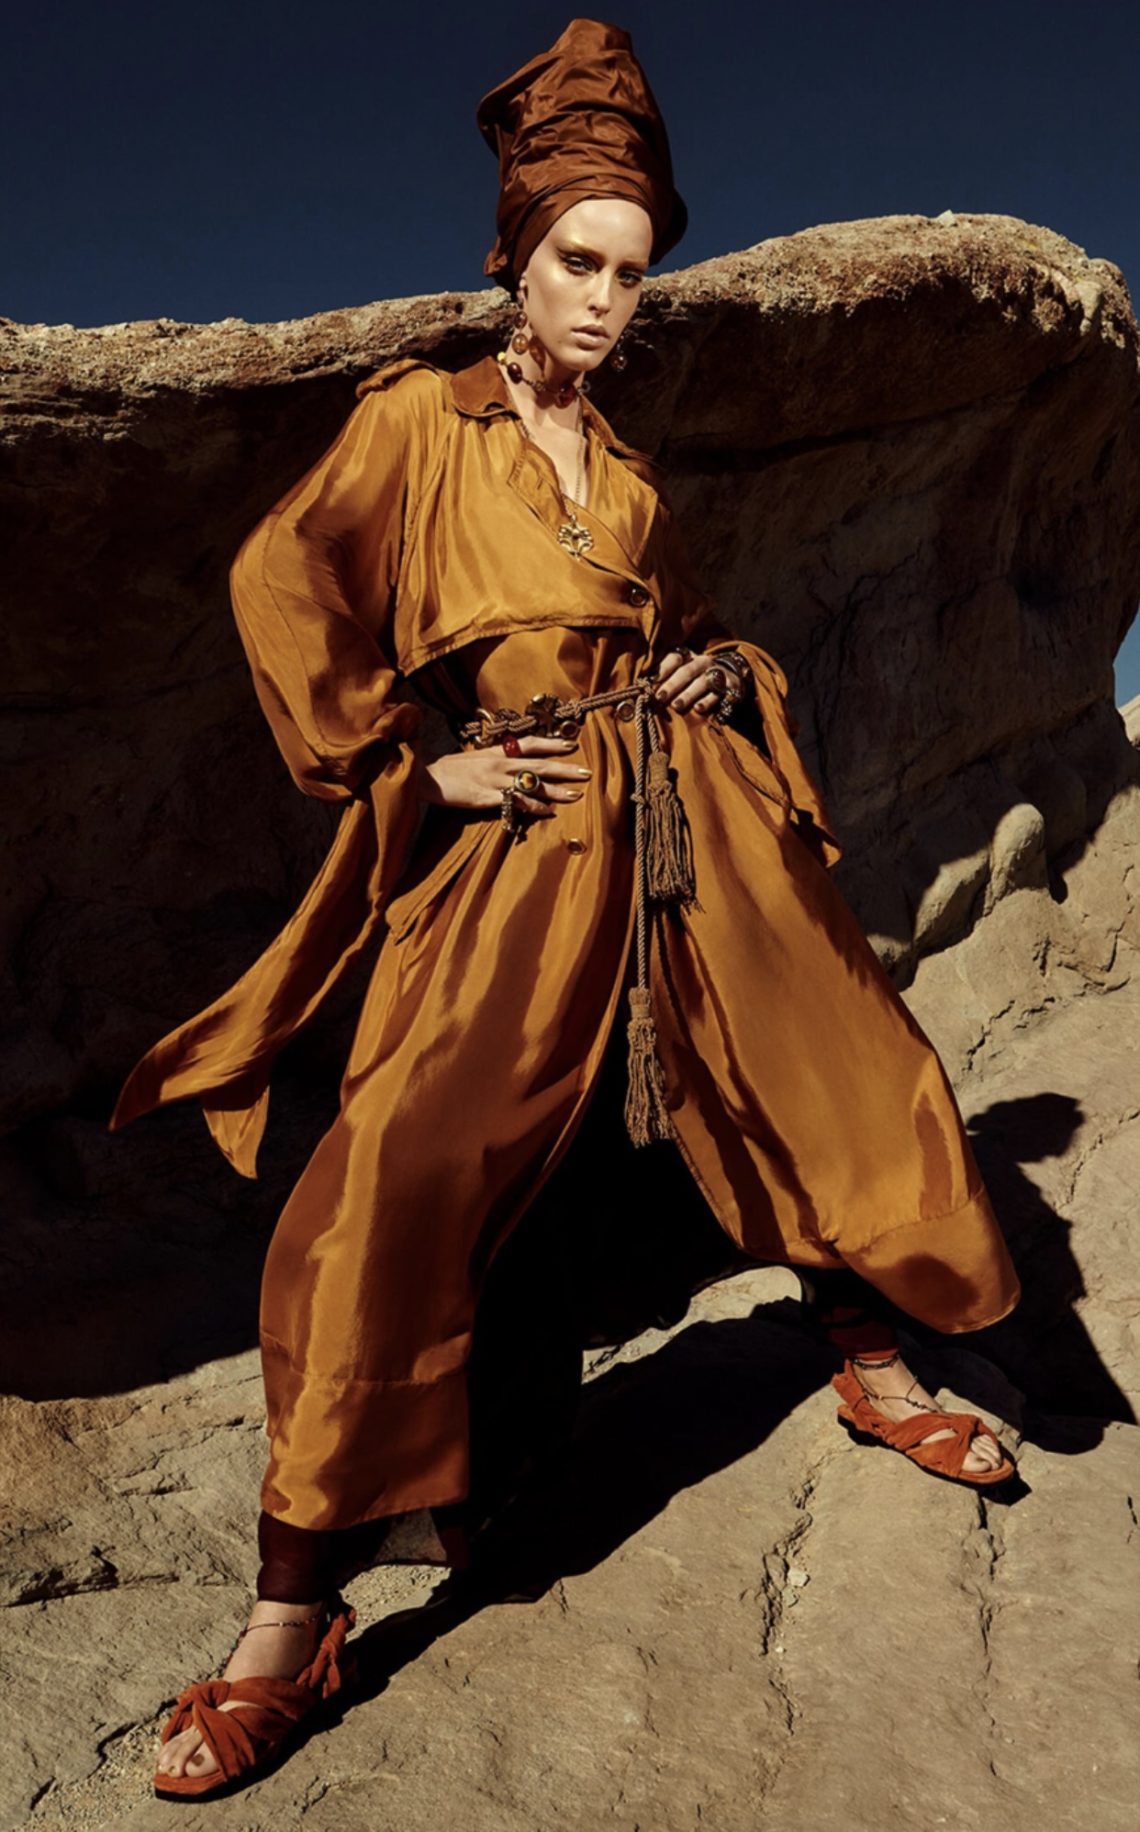 Zara's Spring/Summer 2021 Campaign is Out - thatgirlArlene